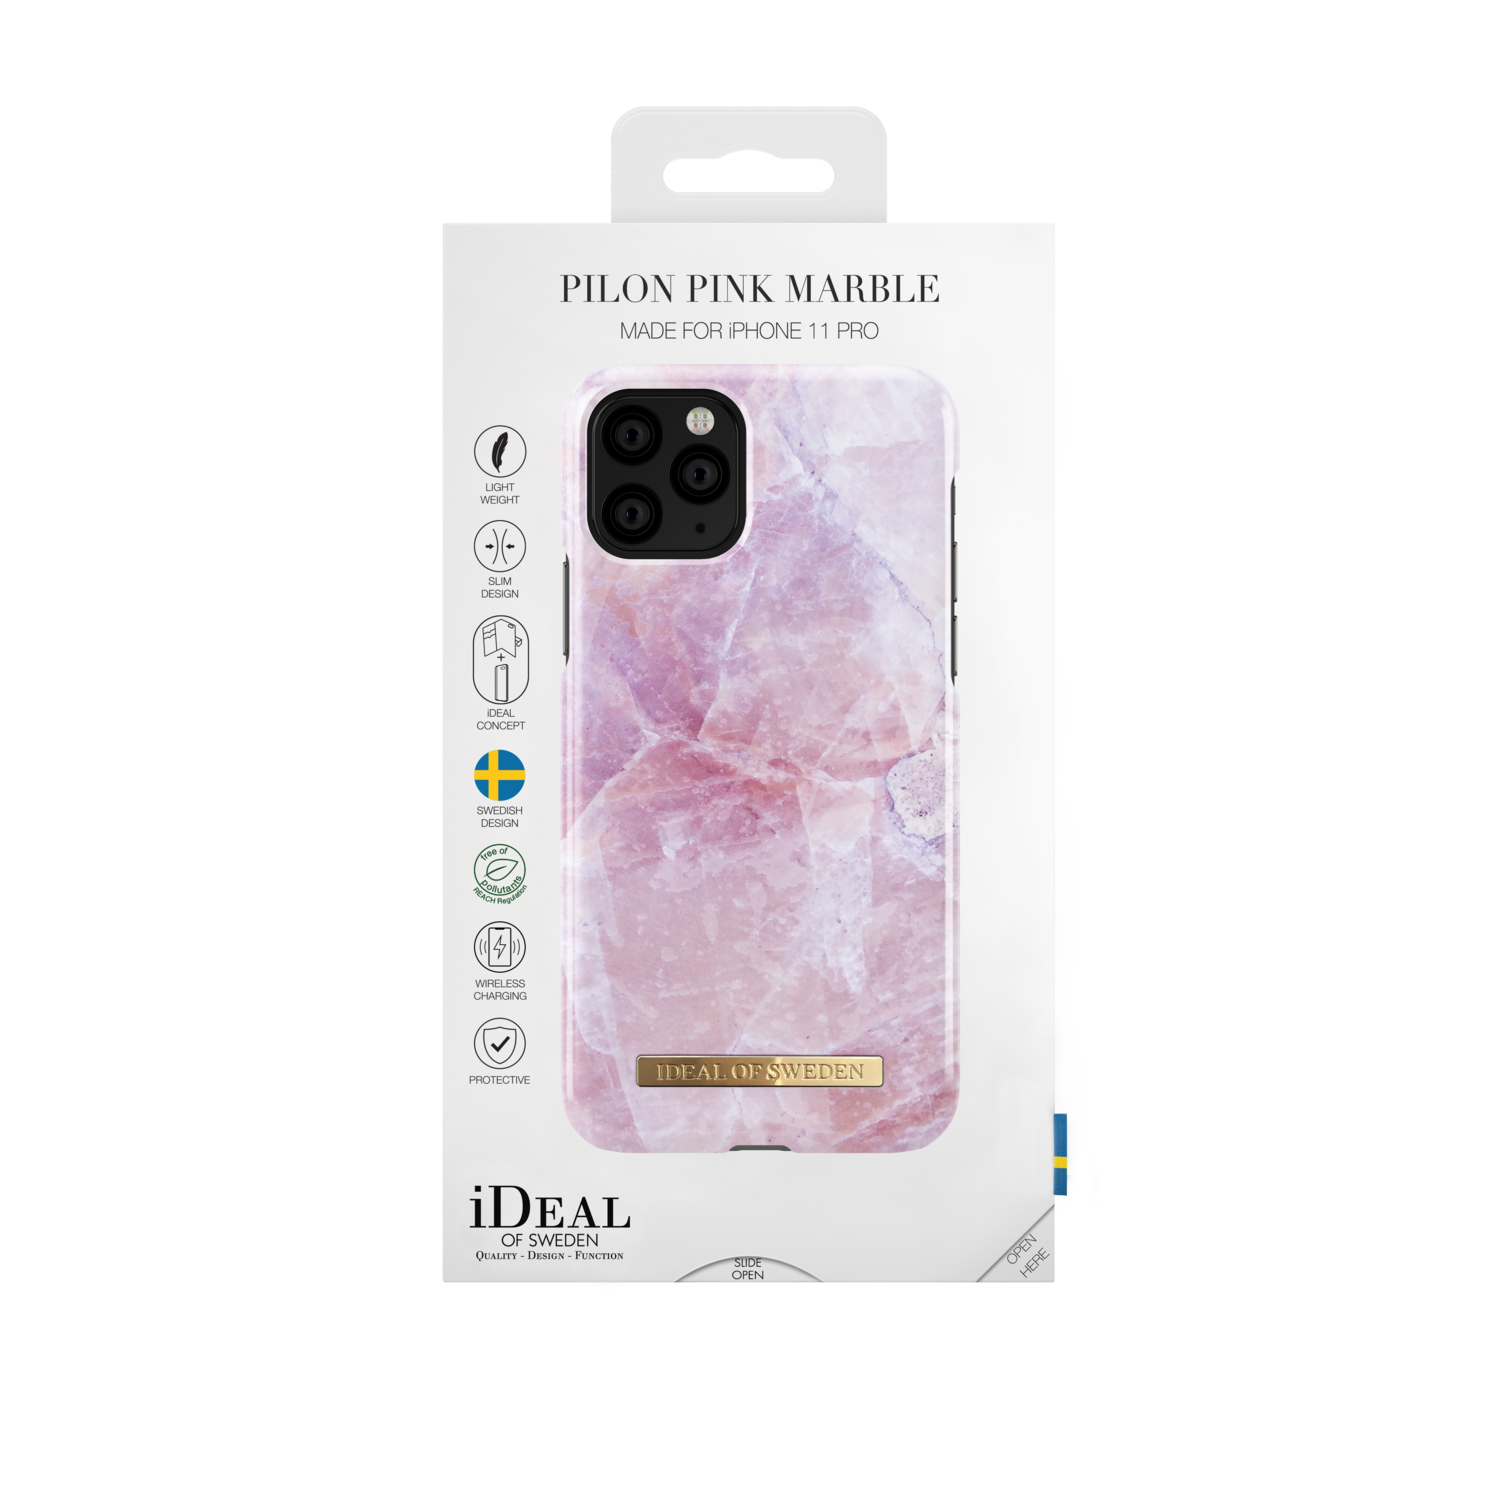 iDeal Of Sweden iPhone 11 Pro 5.8" Fashion Case 2019, Pilion Pink Marble